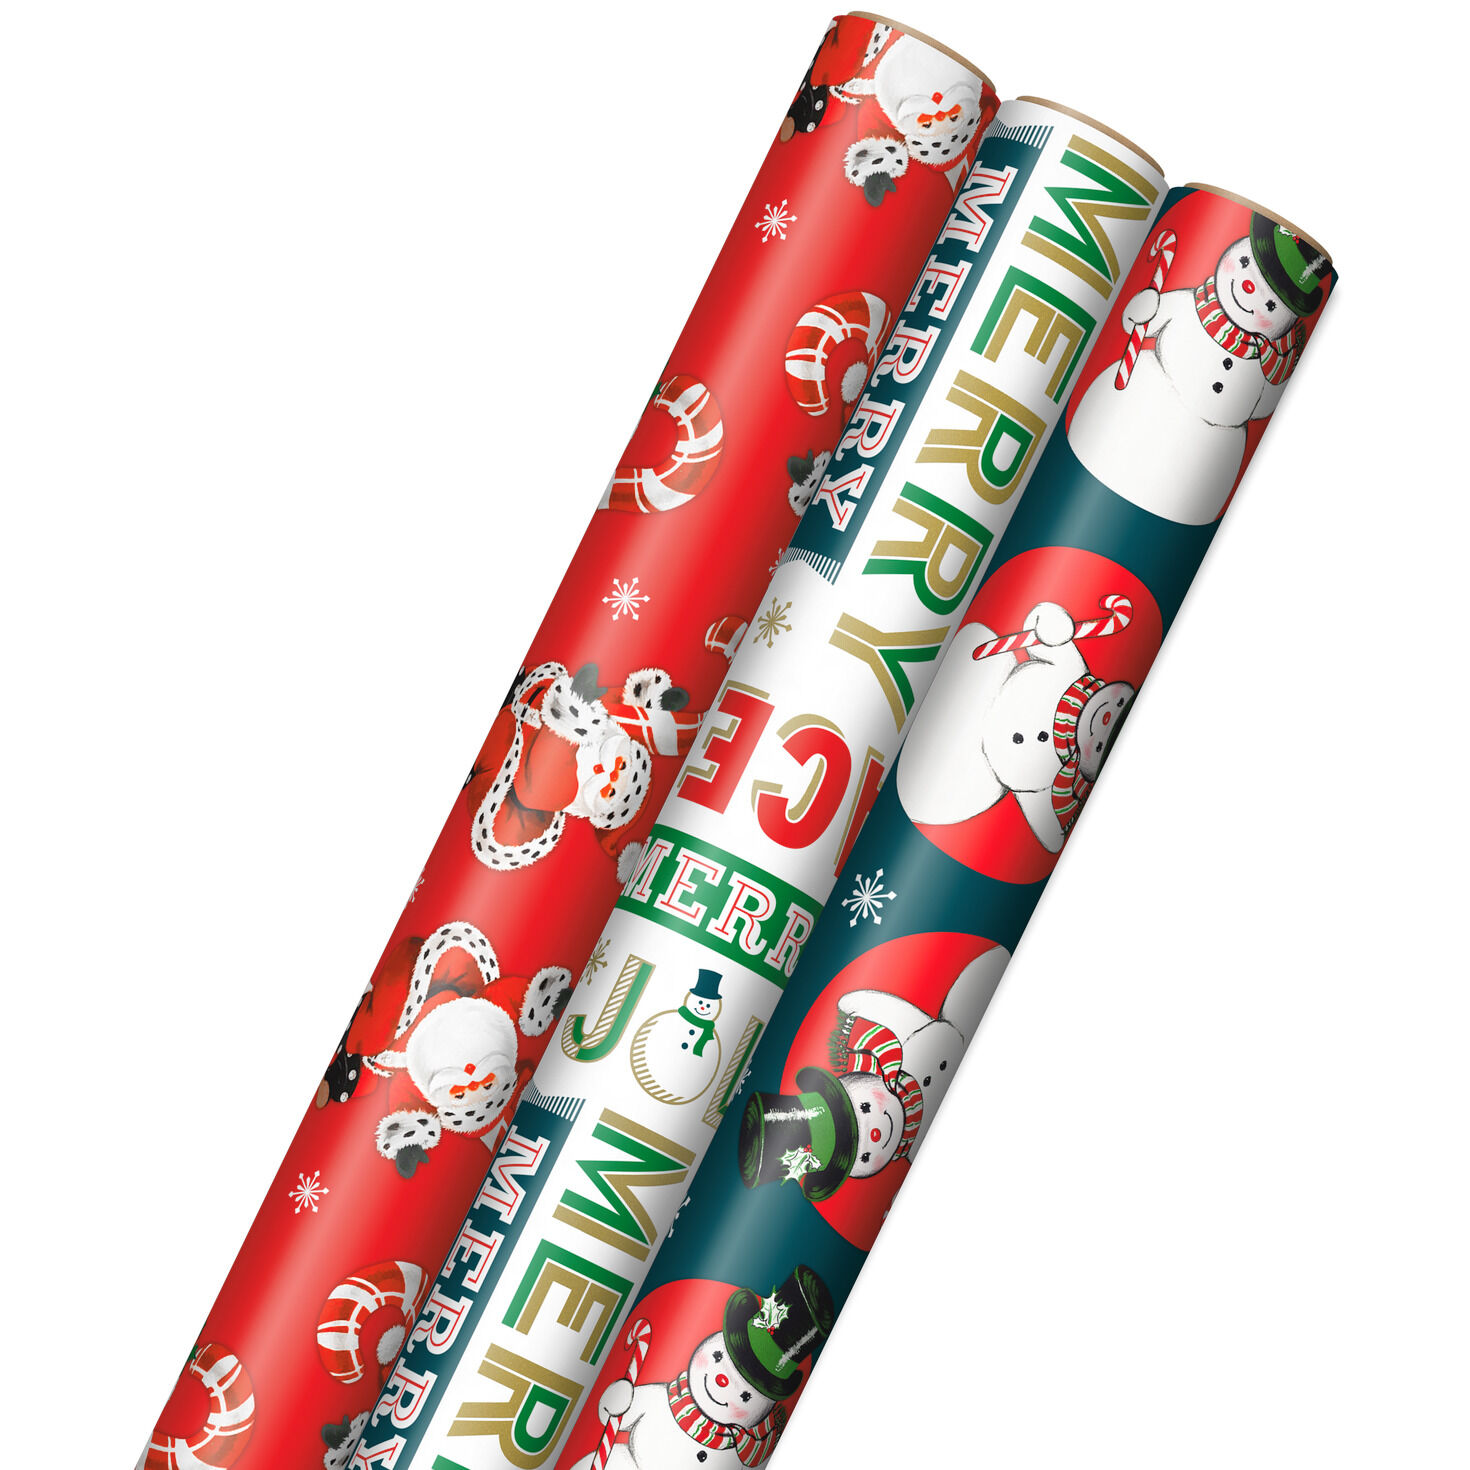 Very Vintage Christmas 3-Pack Assortment Wrapping Paper, 120 sq